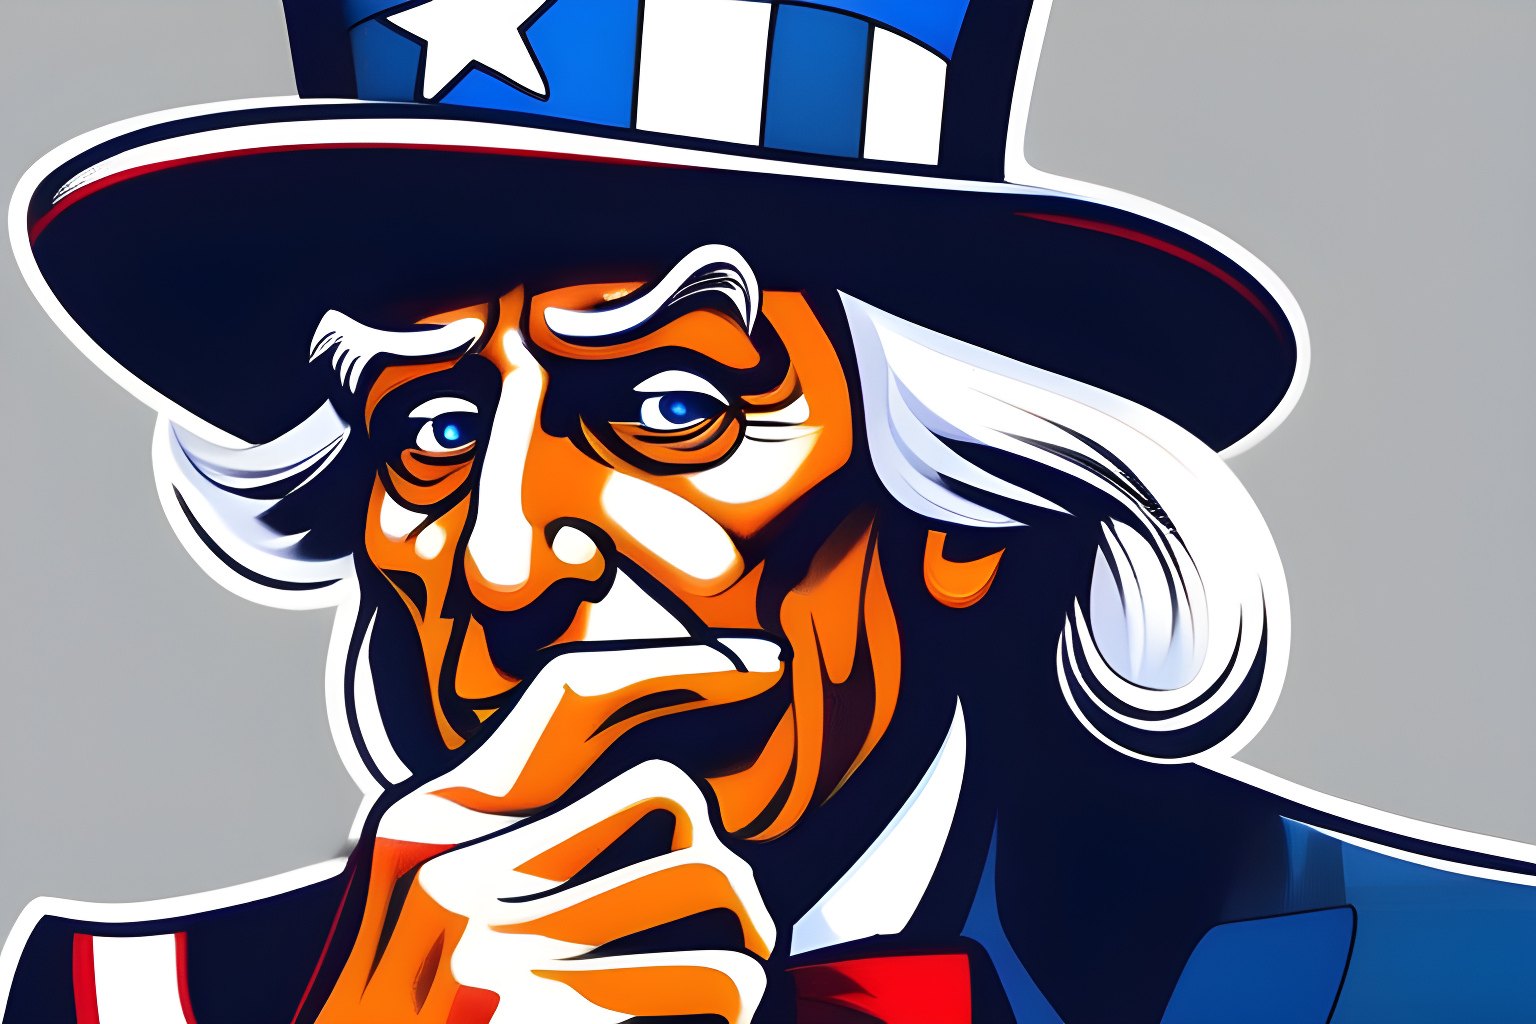 a person pondering to be or not to be but it's actually uncle sam